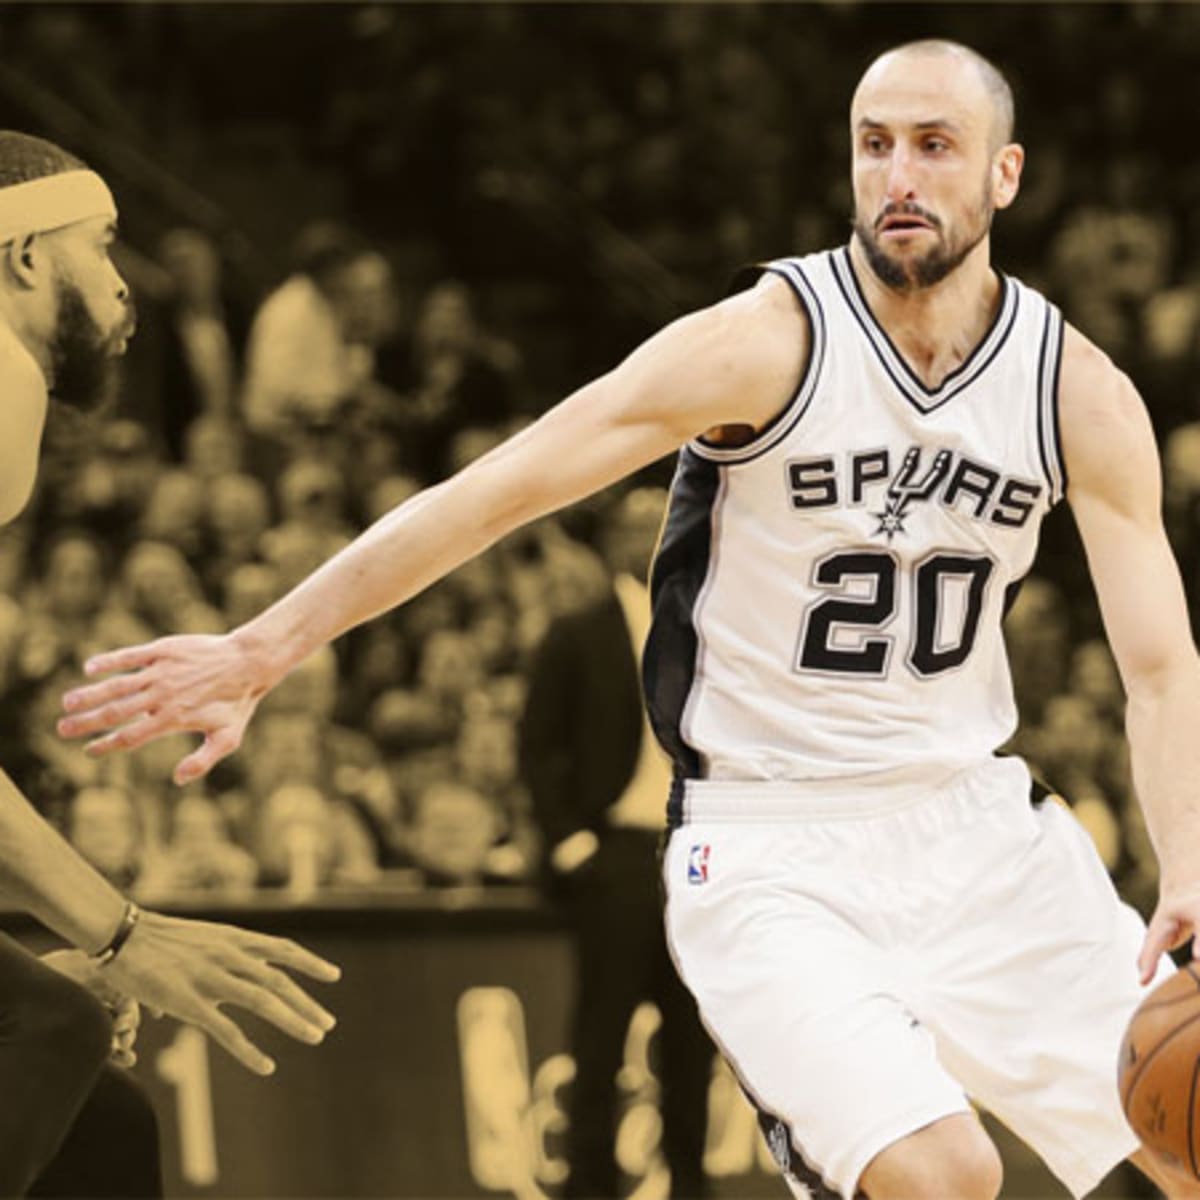 Garcia] Manu Ginobili wishes he was playing in today's NBA: “If I could  choose which era, I'd like to play now. Fast paced. A lot of threes. A lot  of possessions. I